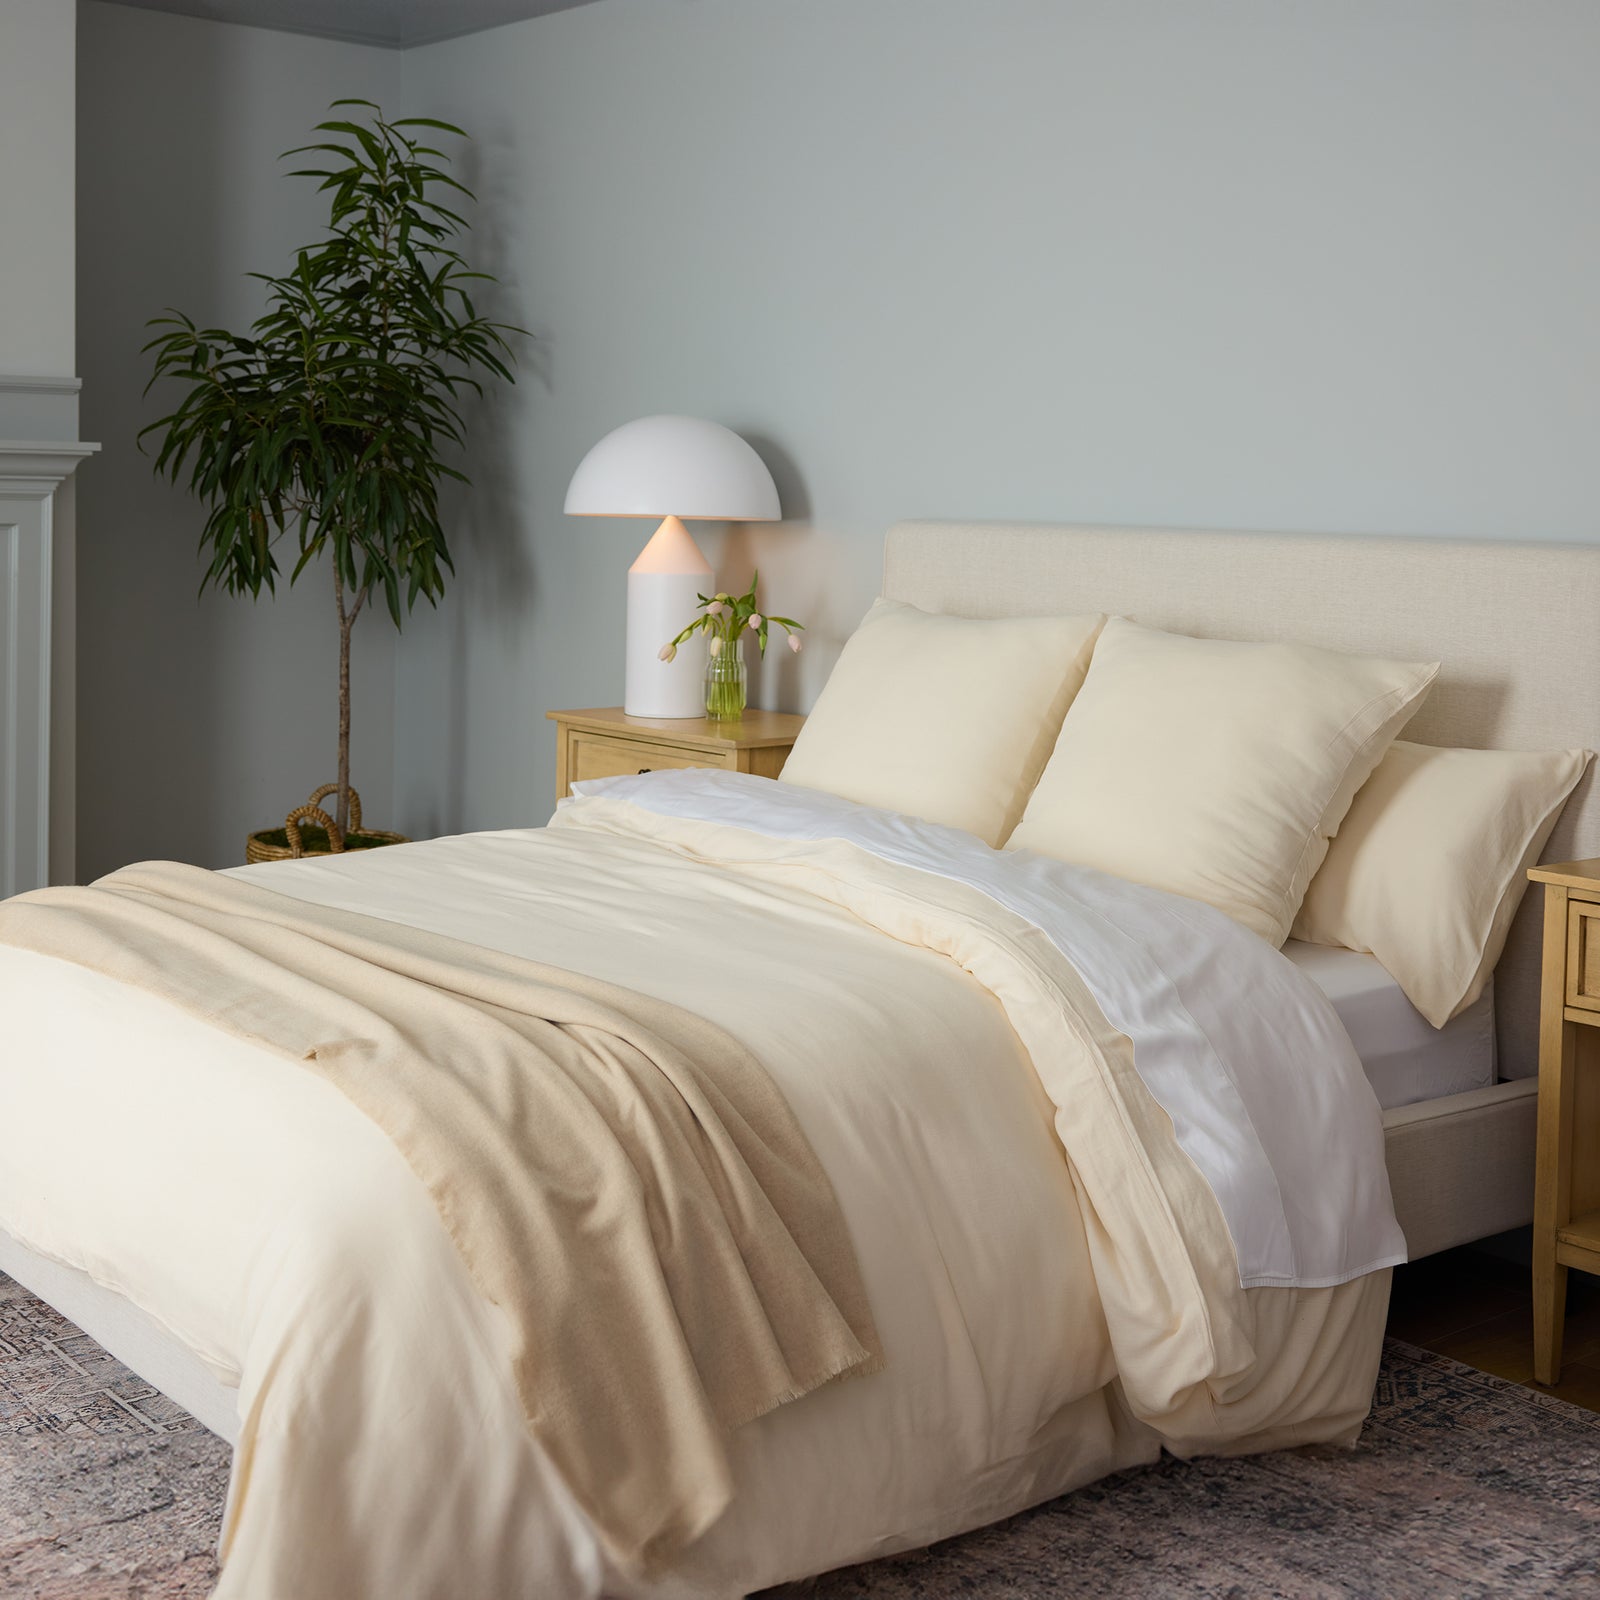 Buttermilk Aire Bamboo Duvet Cover. The Duvet Cover has been photographed while on a bed in a home bedroom.